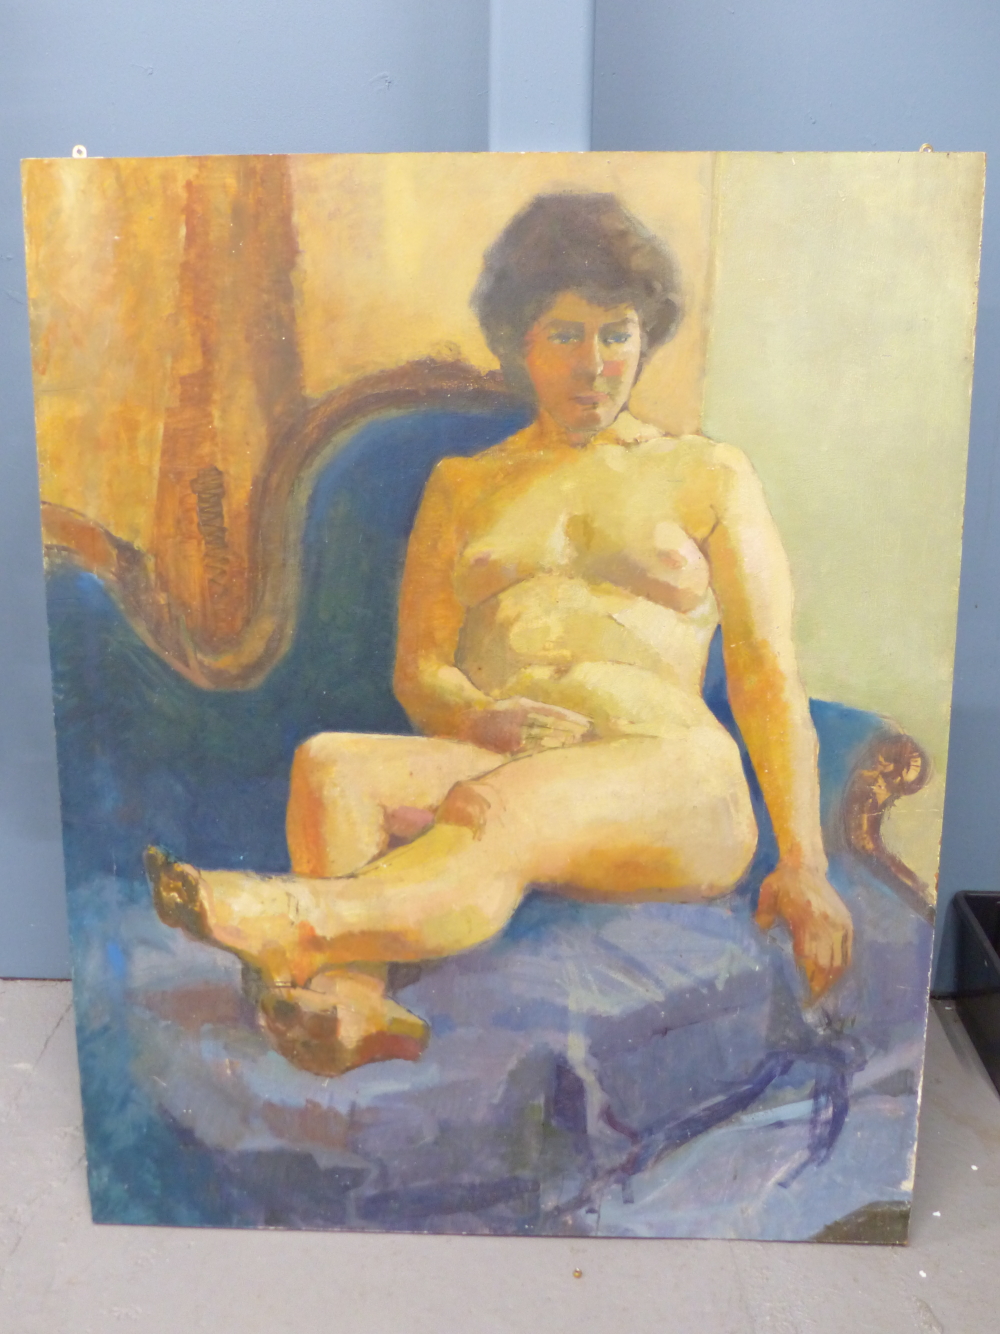 BRIAN MARTIN WILSON (20TH CENTURY), RECLINING NUDE, OIL ON BOARD, SIGNED AND INSCRIBED VERSO CHELSEA - Image 2 of 3